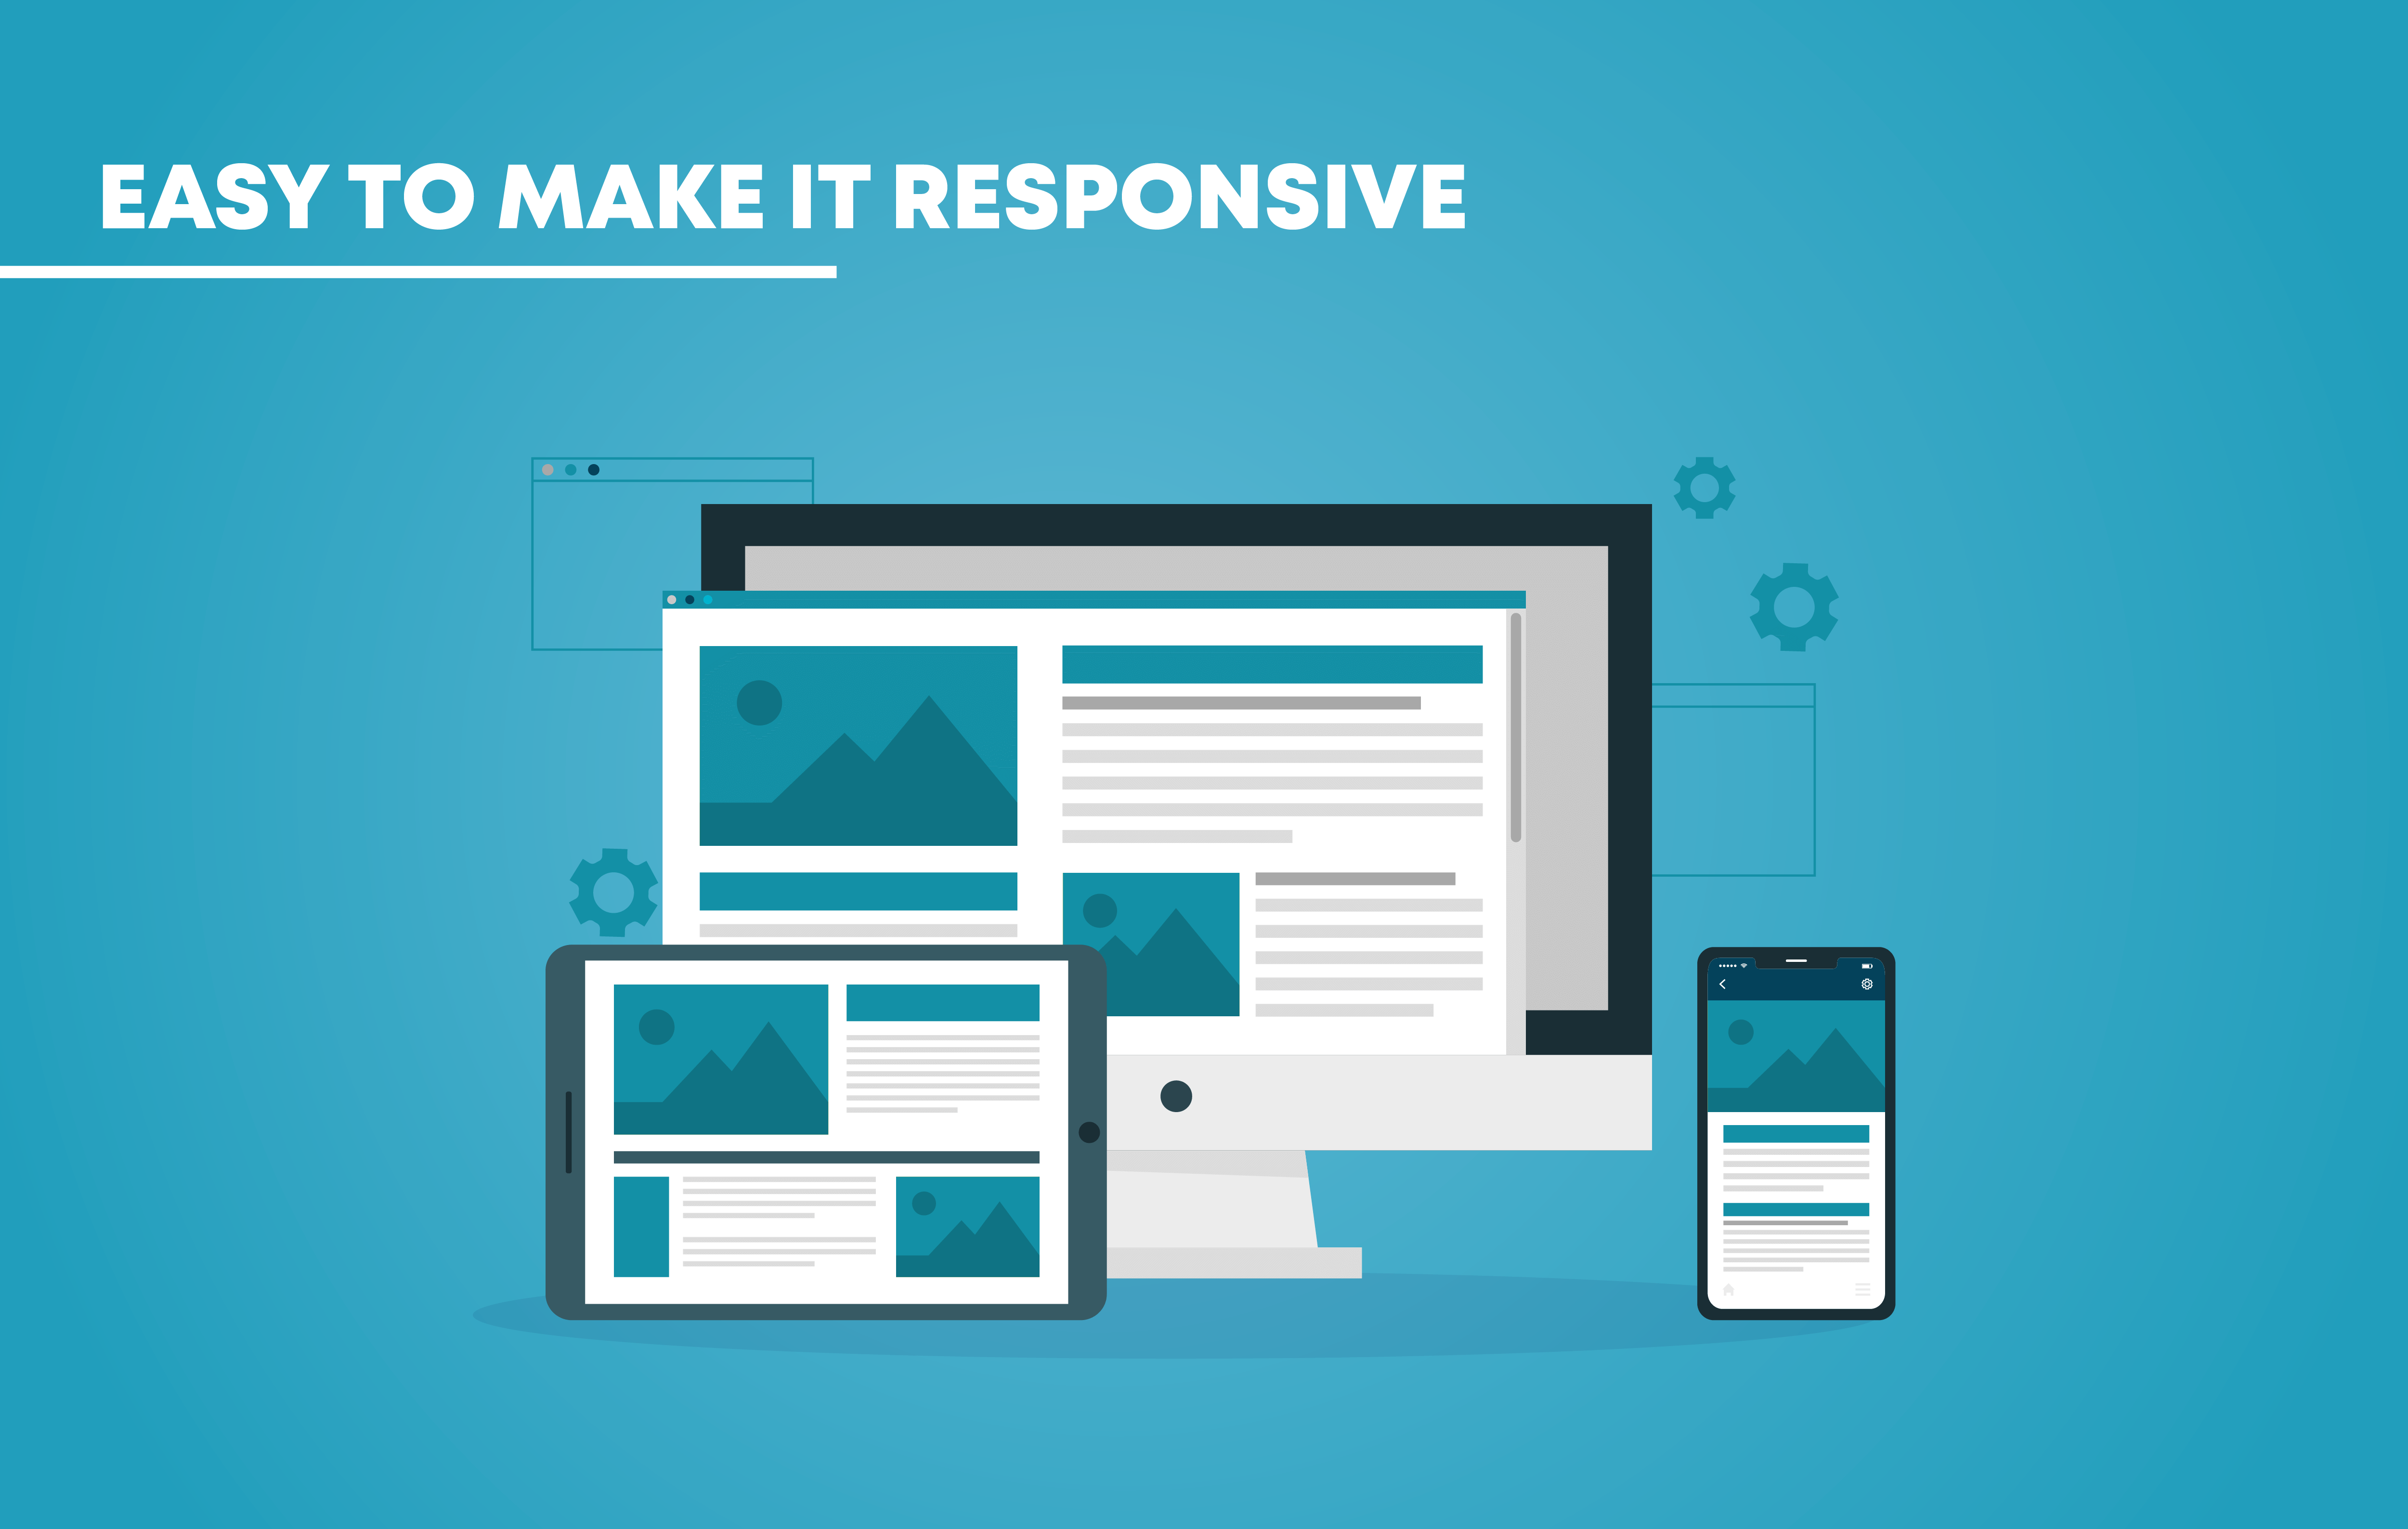 WordPress is still the most popular Website Builder because of its easy to make responsive.